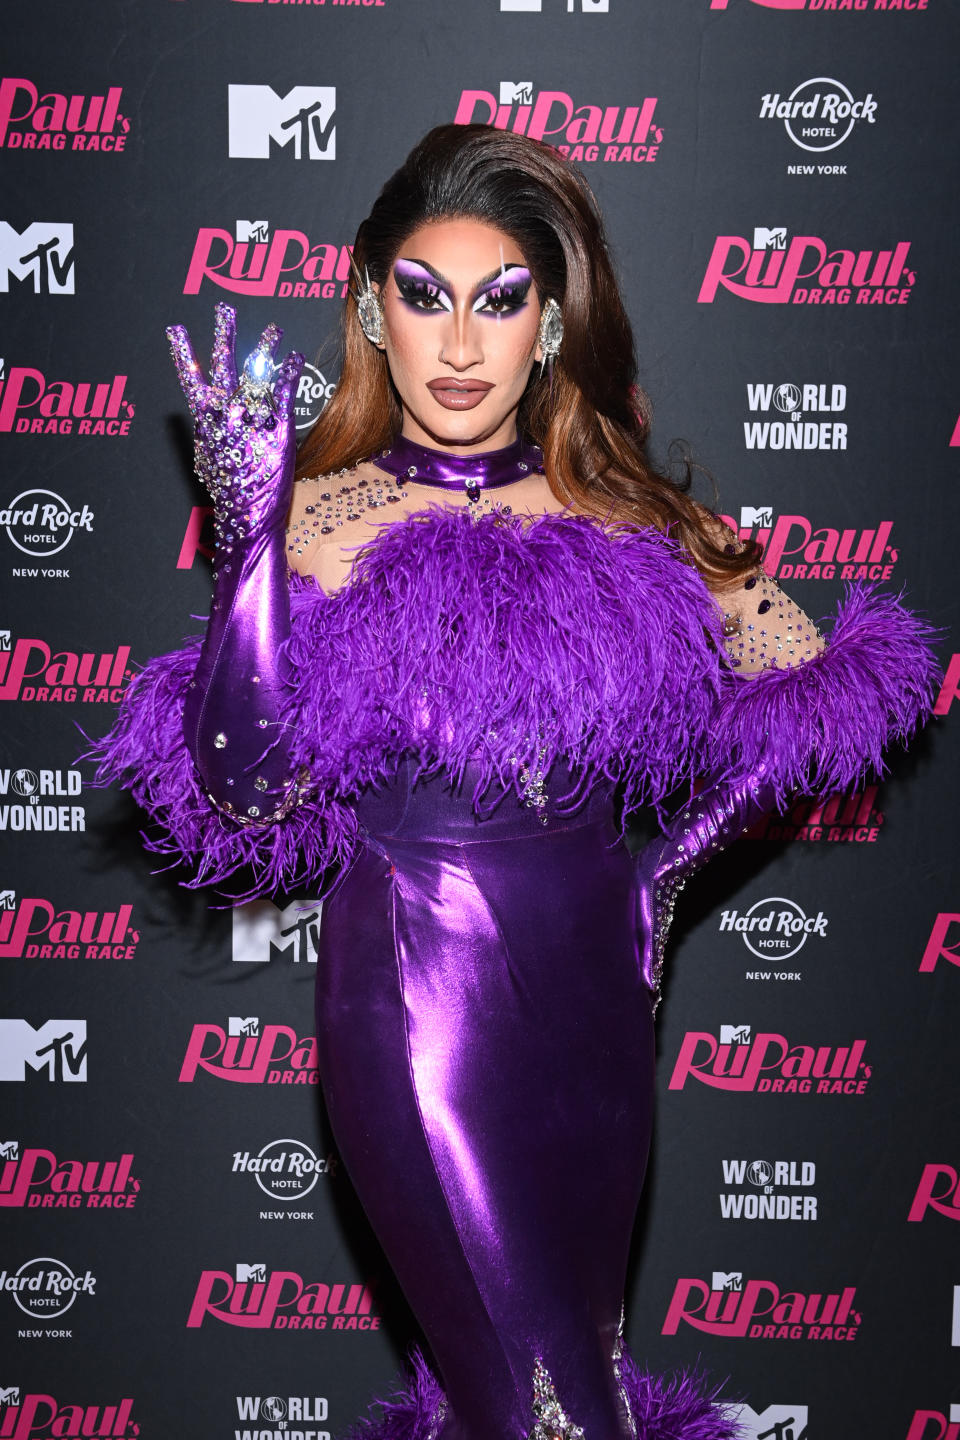 RuPaul's Drag Race Finale Watch Party Event At Hard Rock Hotel (Dave Kotinsky / Getty Images for MTV)